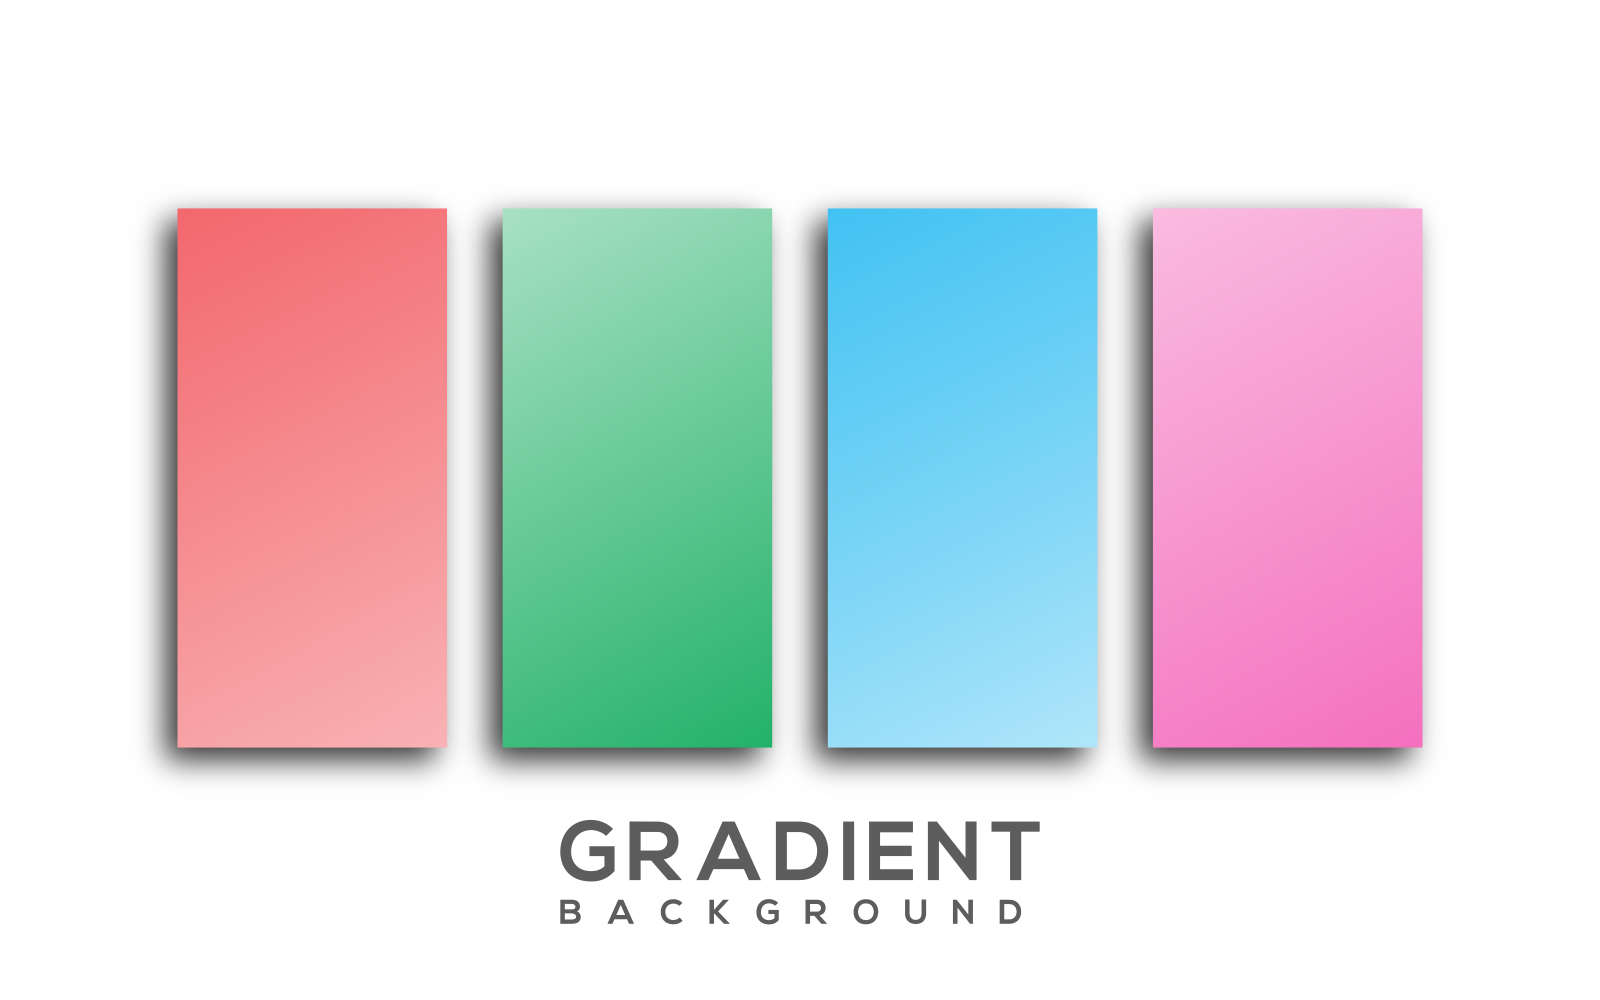 Gradient Vector Background & Illustrations to Download